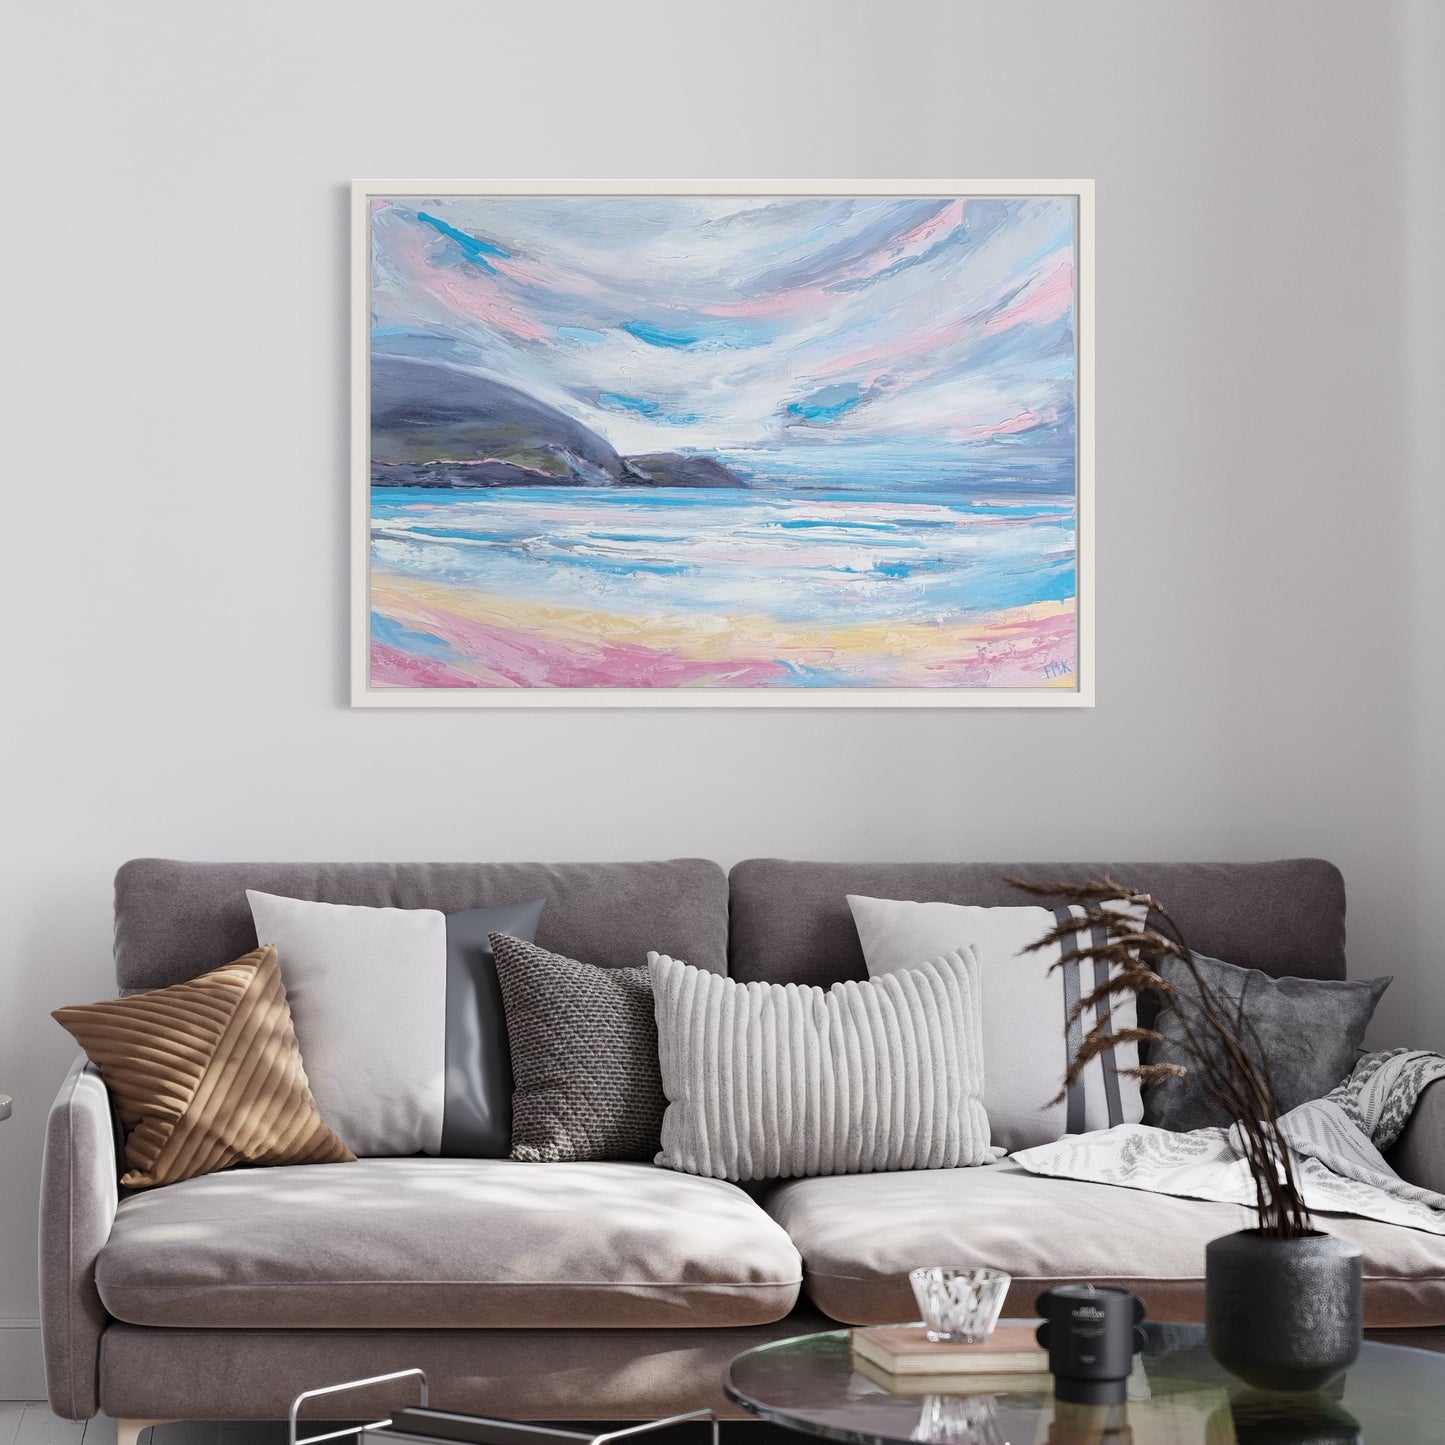 An original oil painting of Keel Beach, Achill Island, in Co. Mayo on The Wild Atlantic Way.